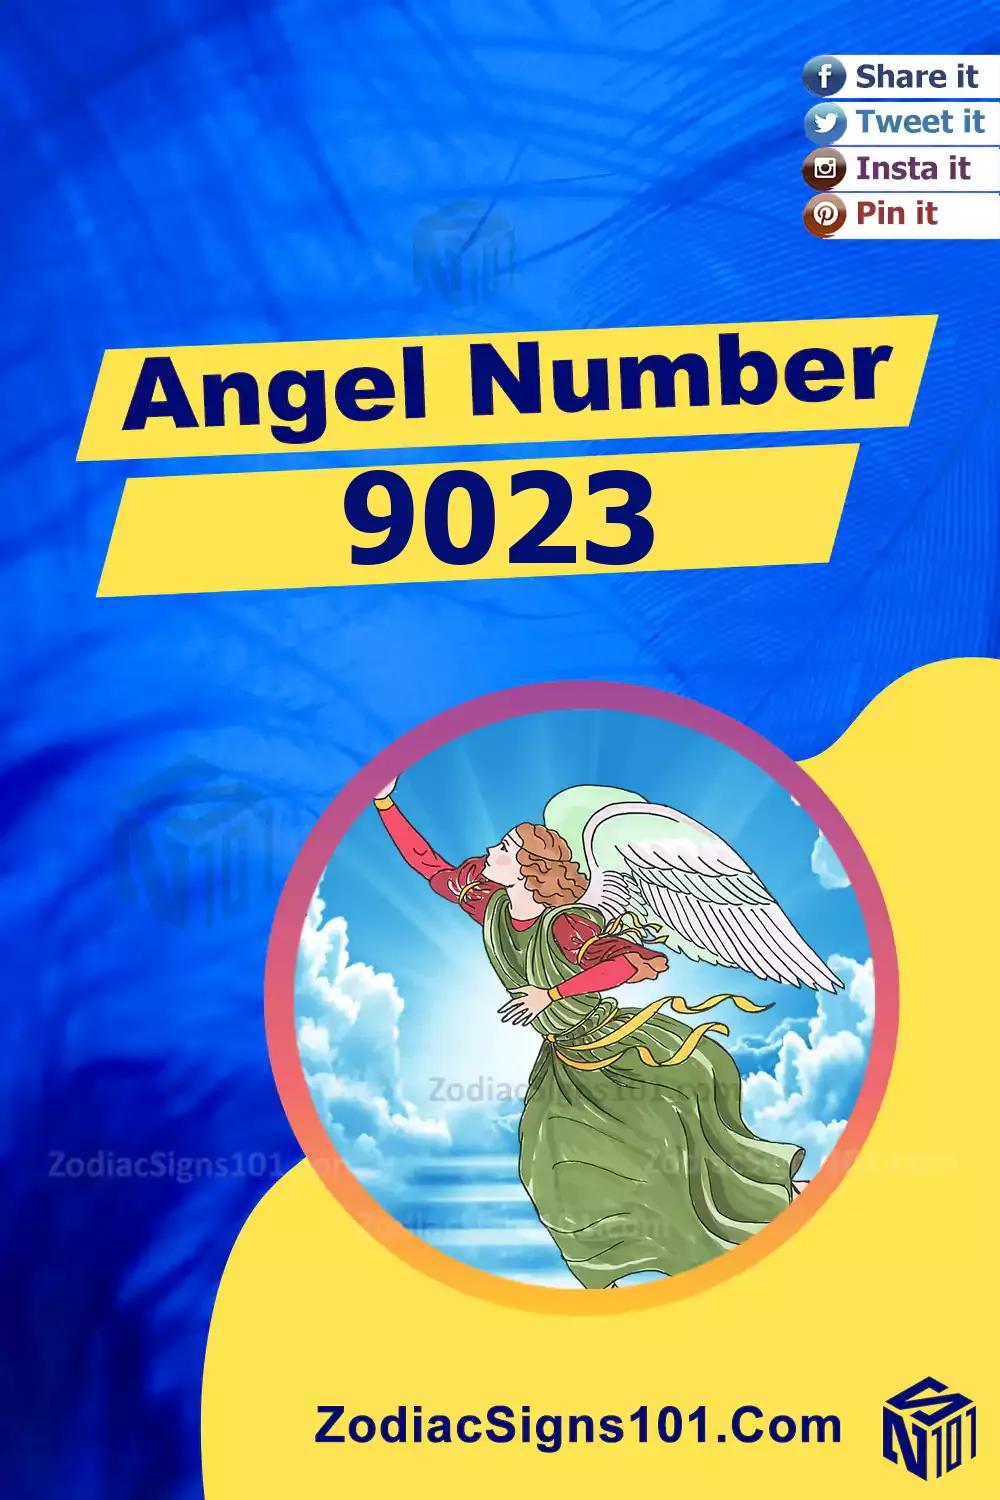 9023 Angel Number Meaning